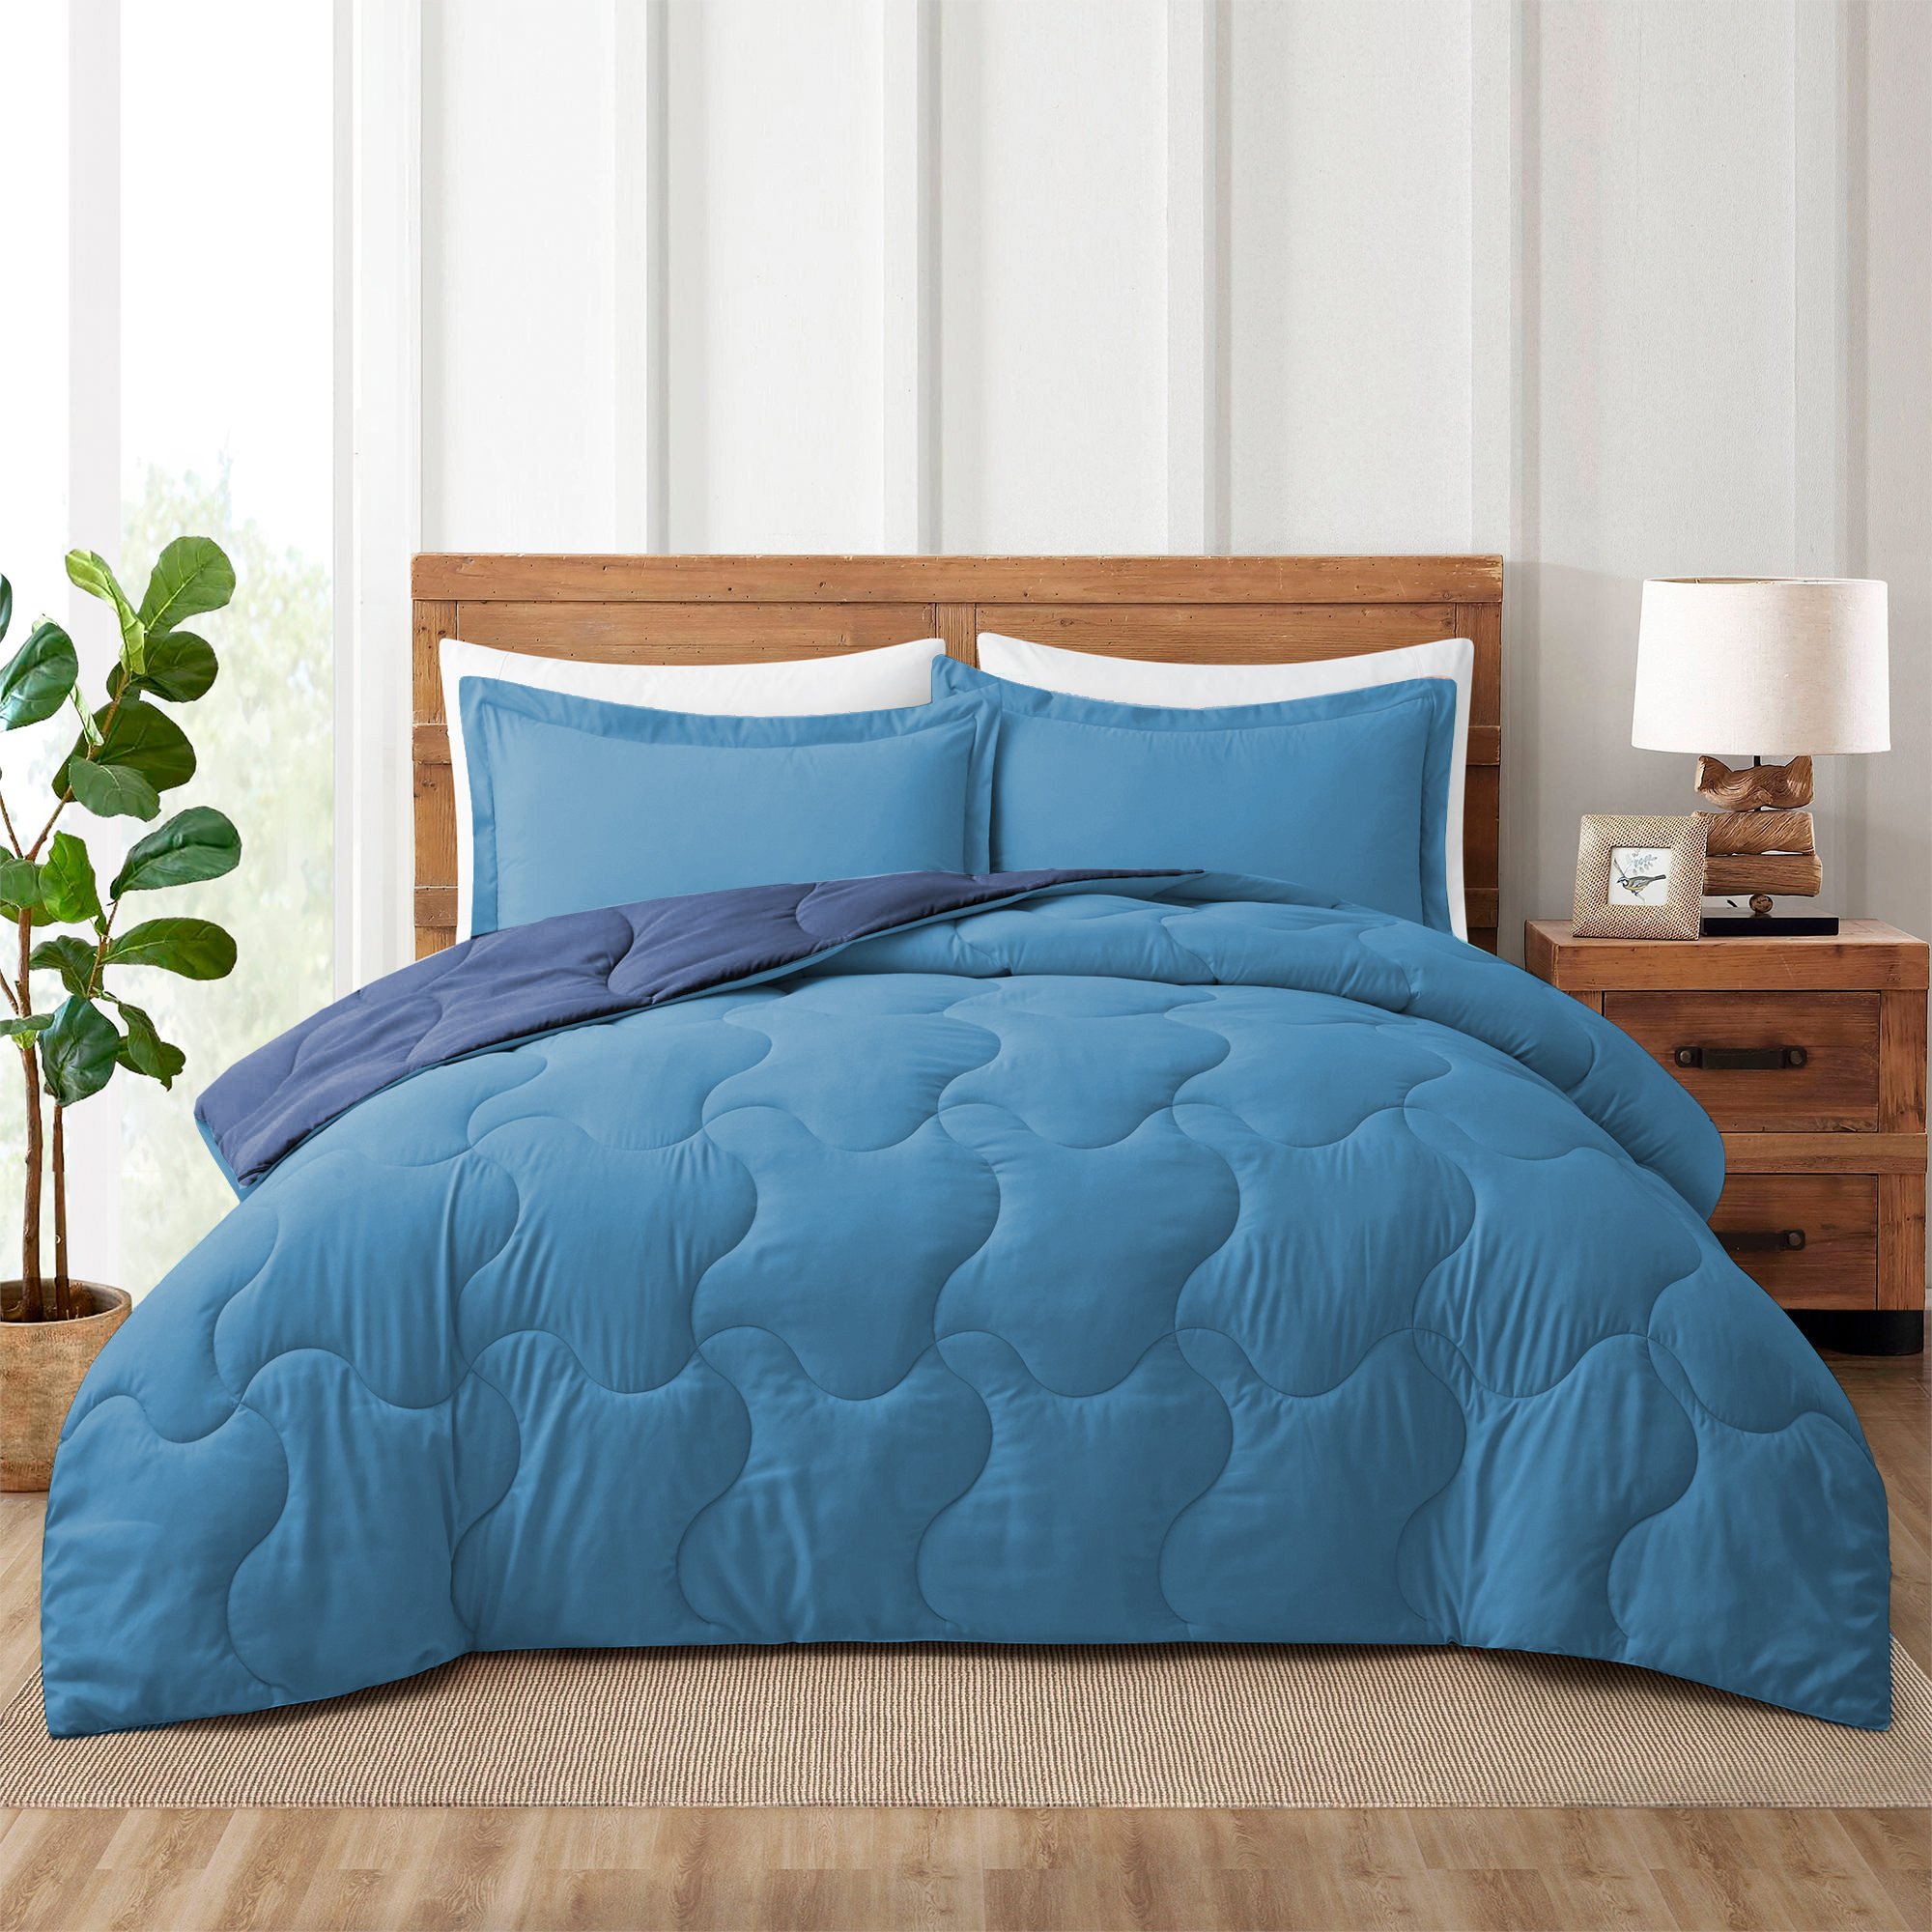 Lightweight Soft Quilted Down Alternative Comforter Reversible Duvet Insert With Corner Tabs - King Size